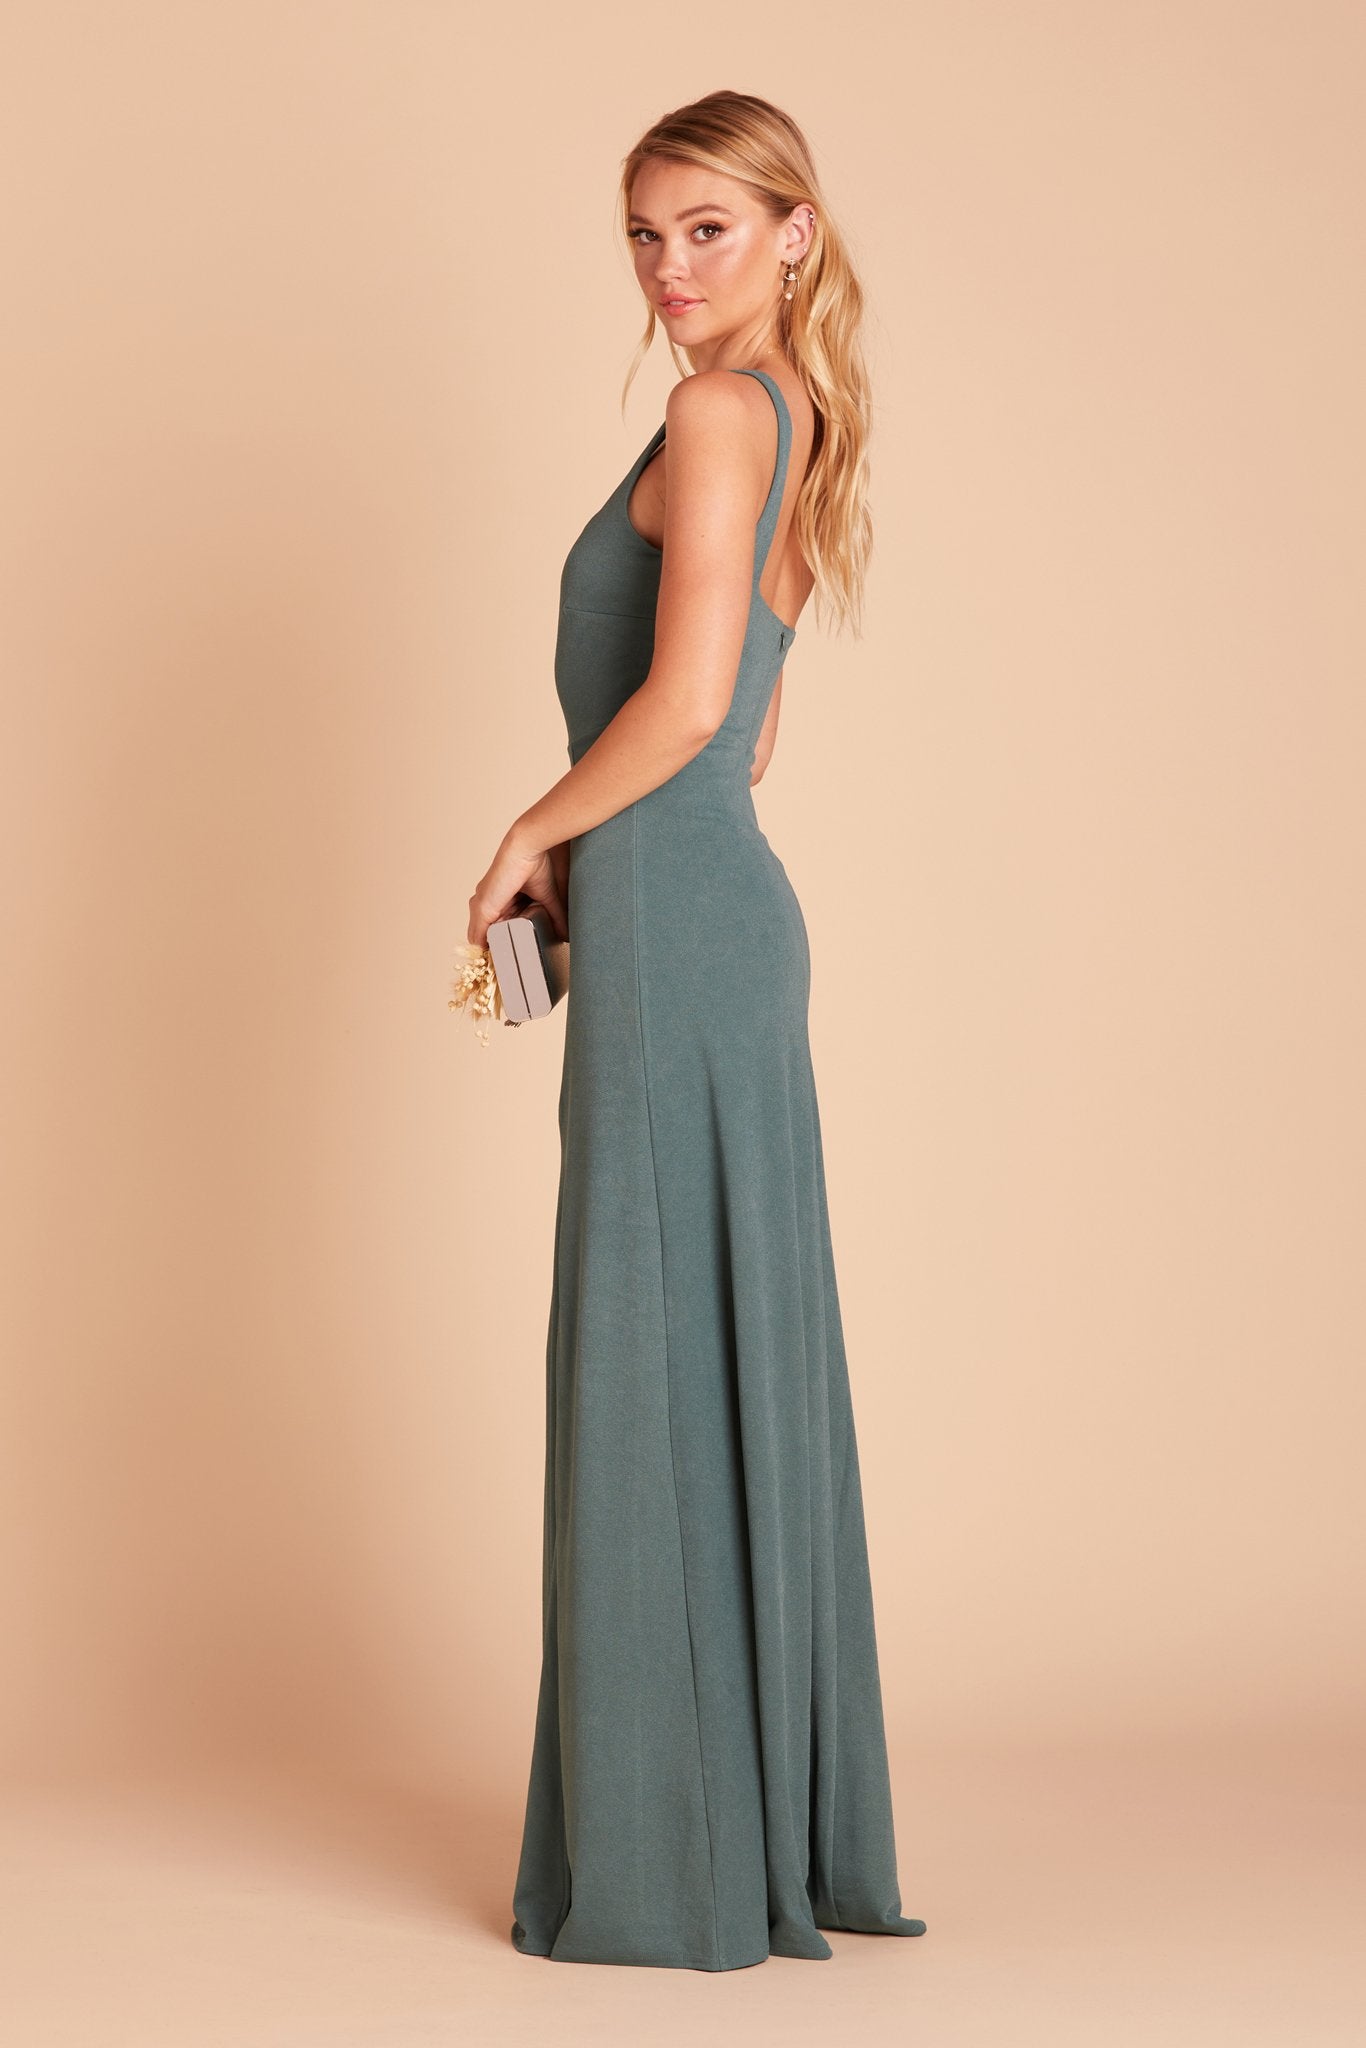 Alex convertible bridesmaid dress with slit in sea glass green crepe by Birdy Grey, side view